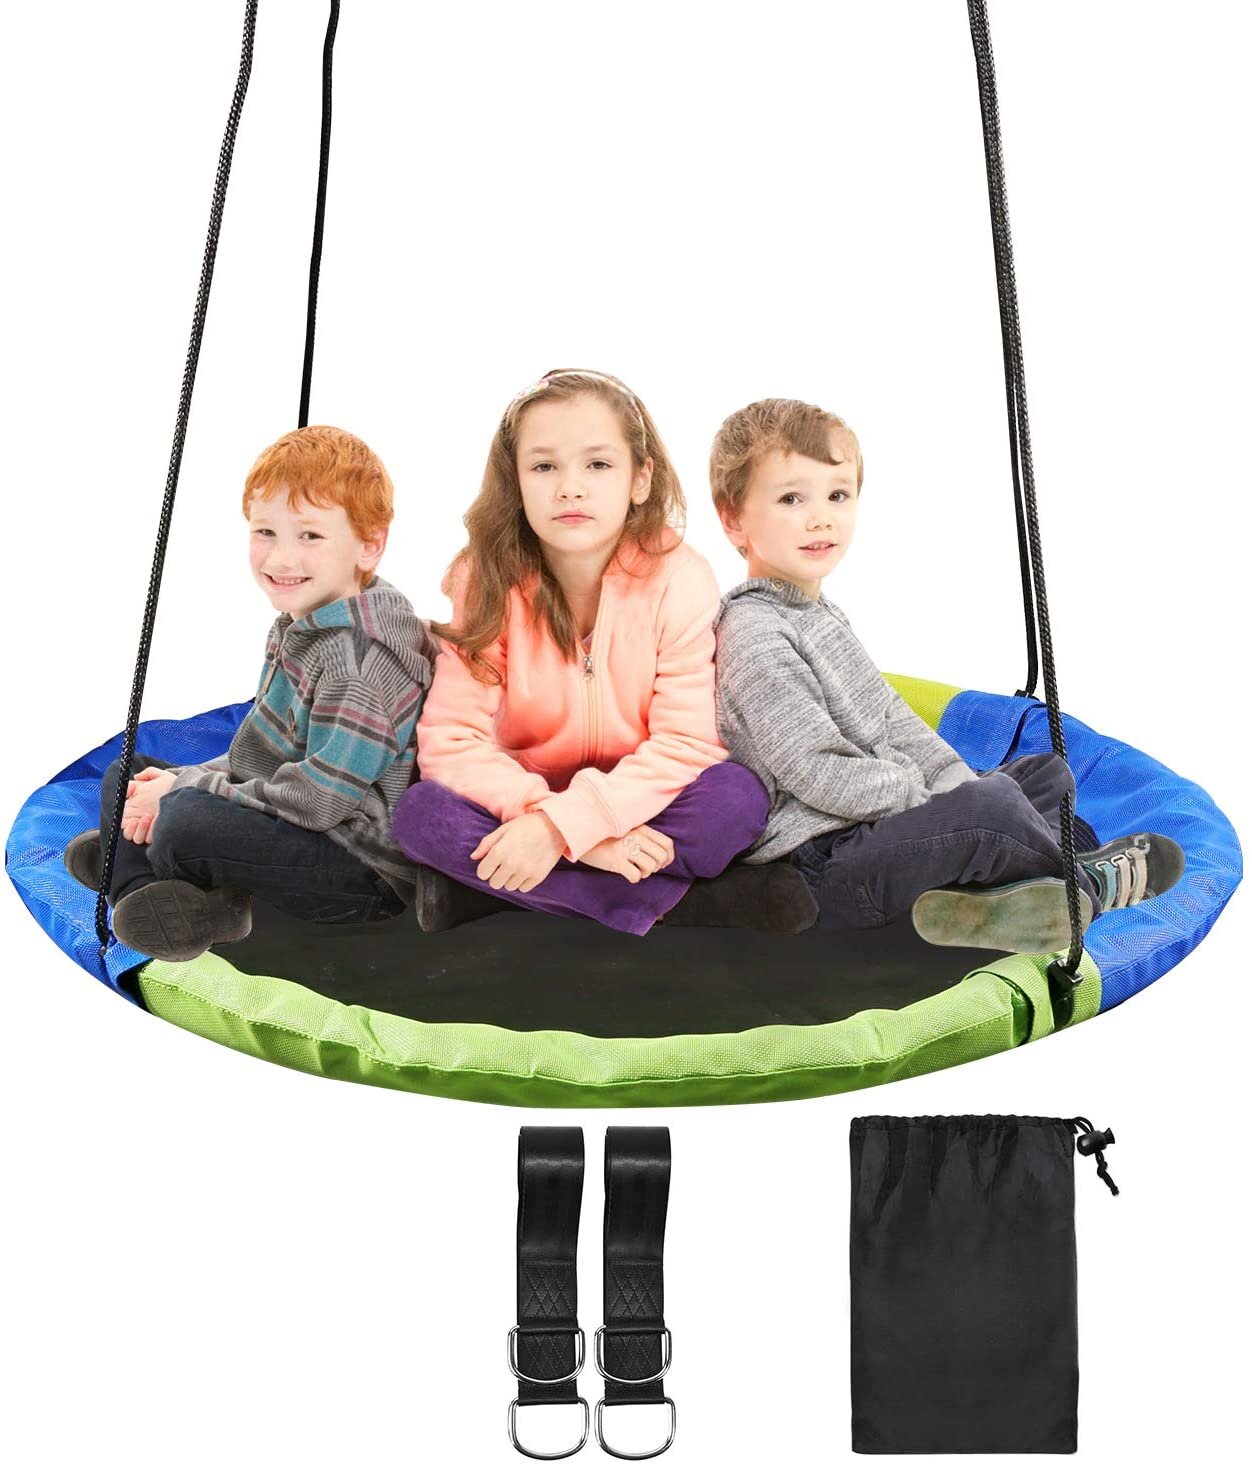 REDCAMP 43 inch Flying Saucer Swing Heavy Duty 500lb for Kids, Large Round Tire Swings for Outdoor Trees and Swingset, Blue/Green